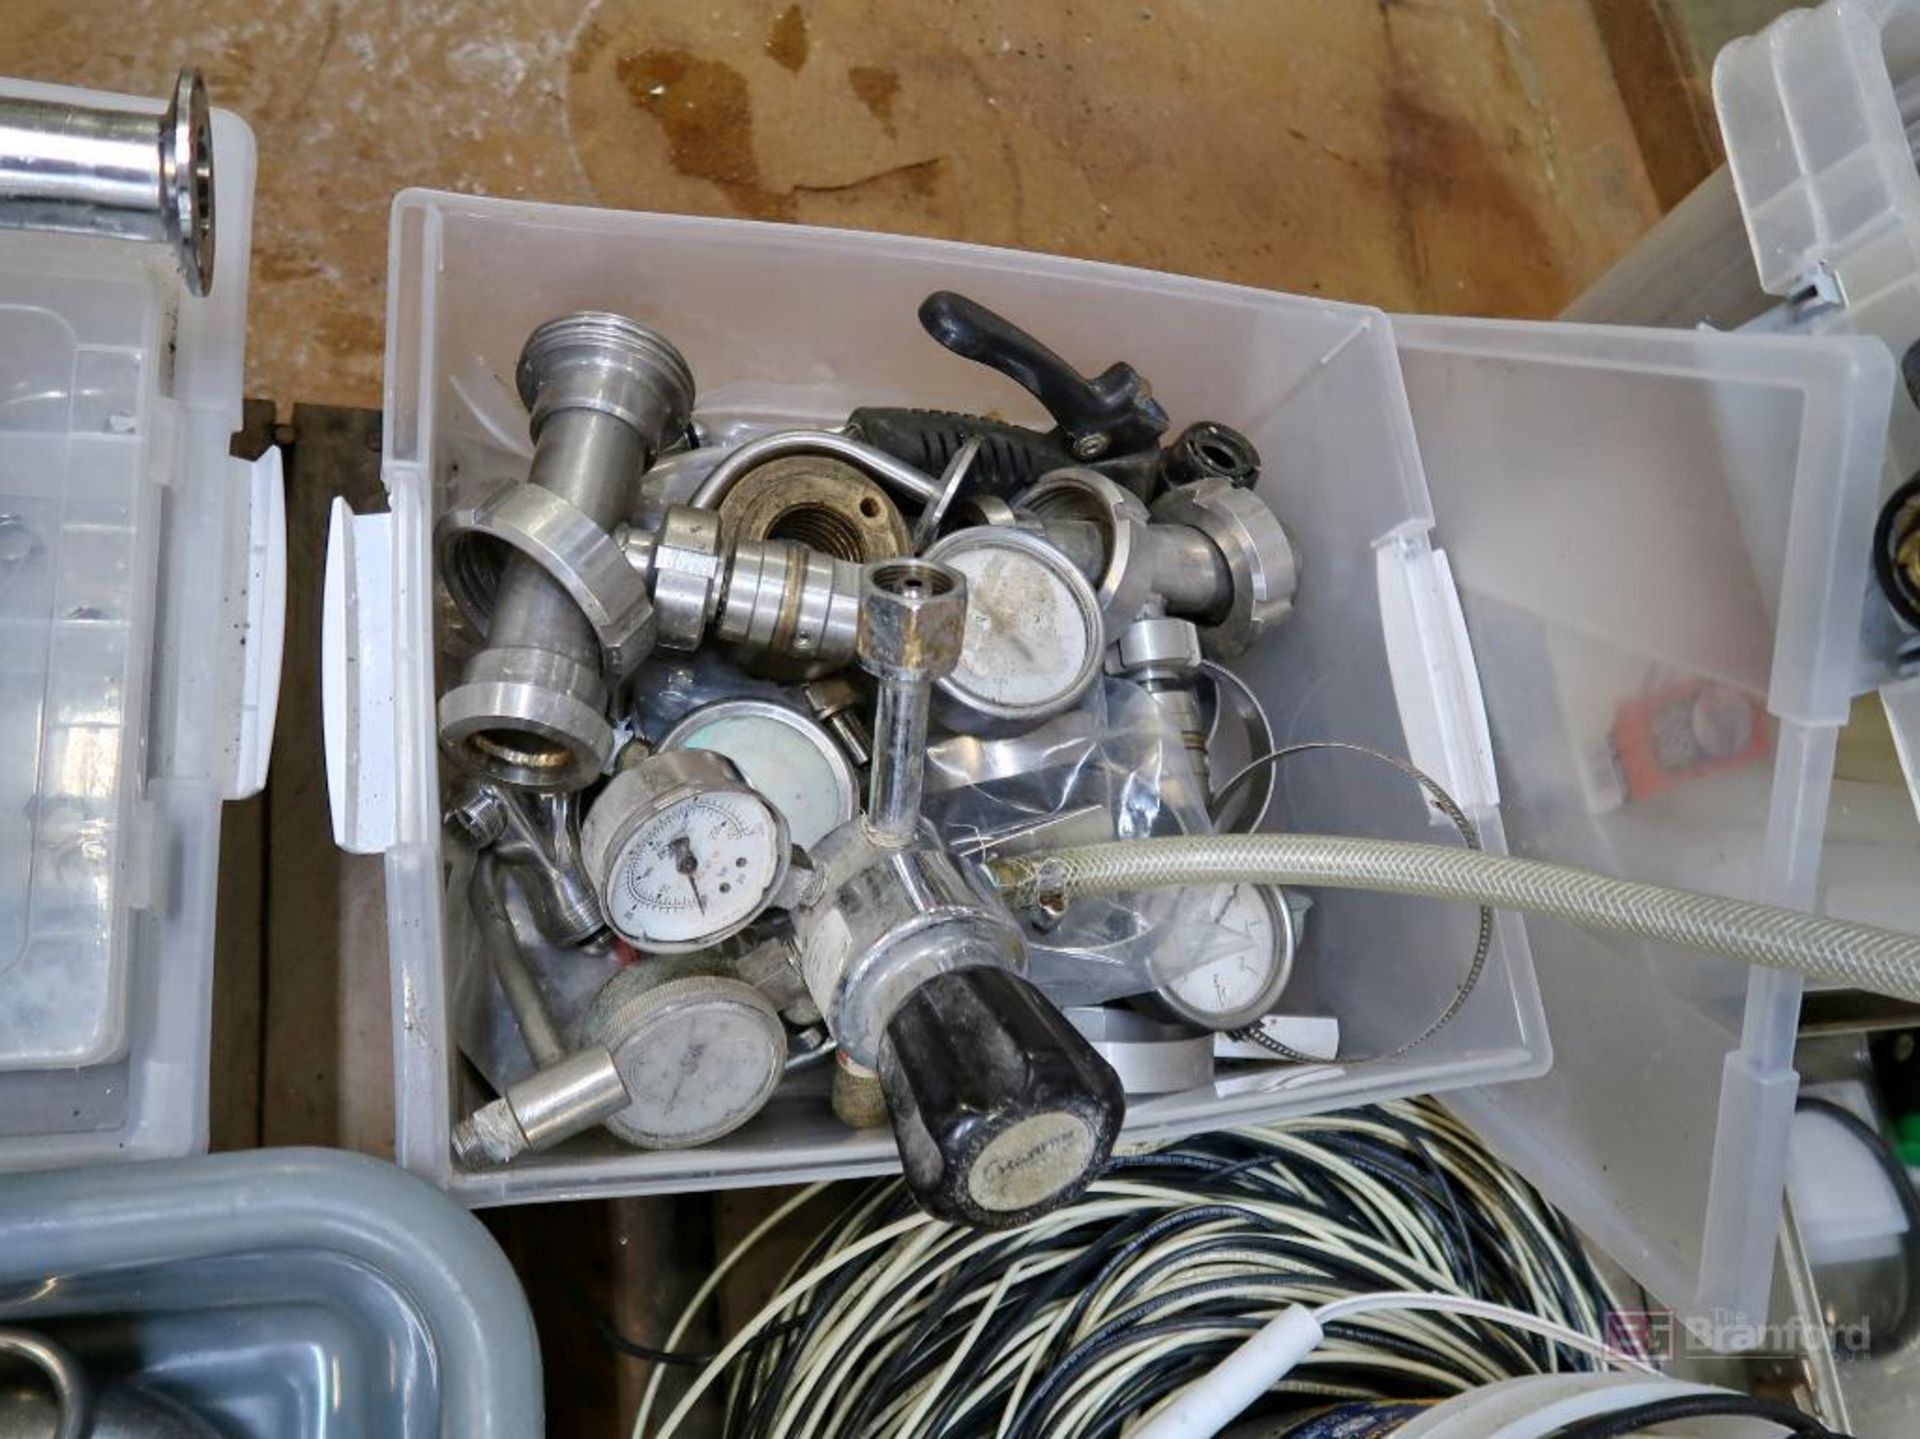 Assorted S/S Valves, Clamps, Elbows, Gages, Hoses, Meters, And Wires - Image 6 of 10